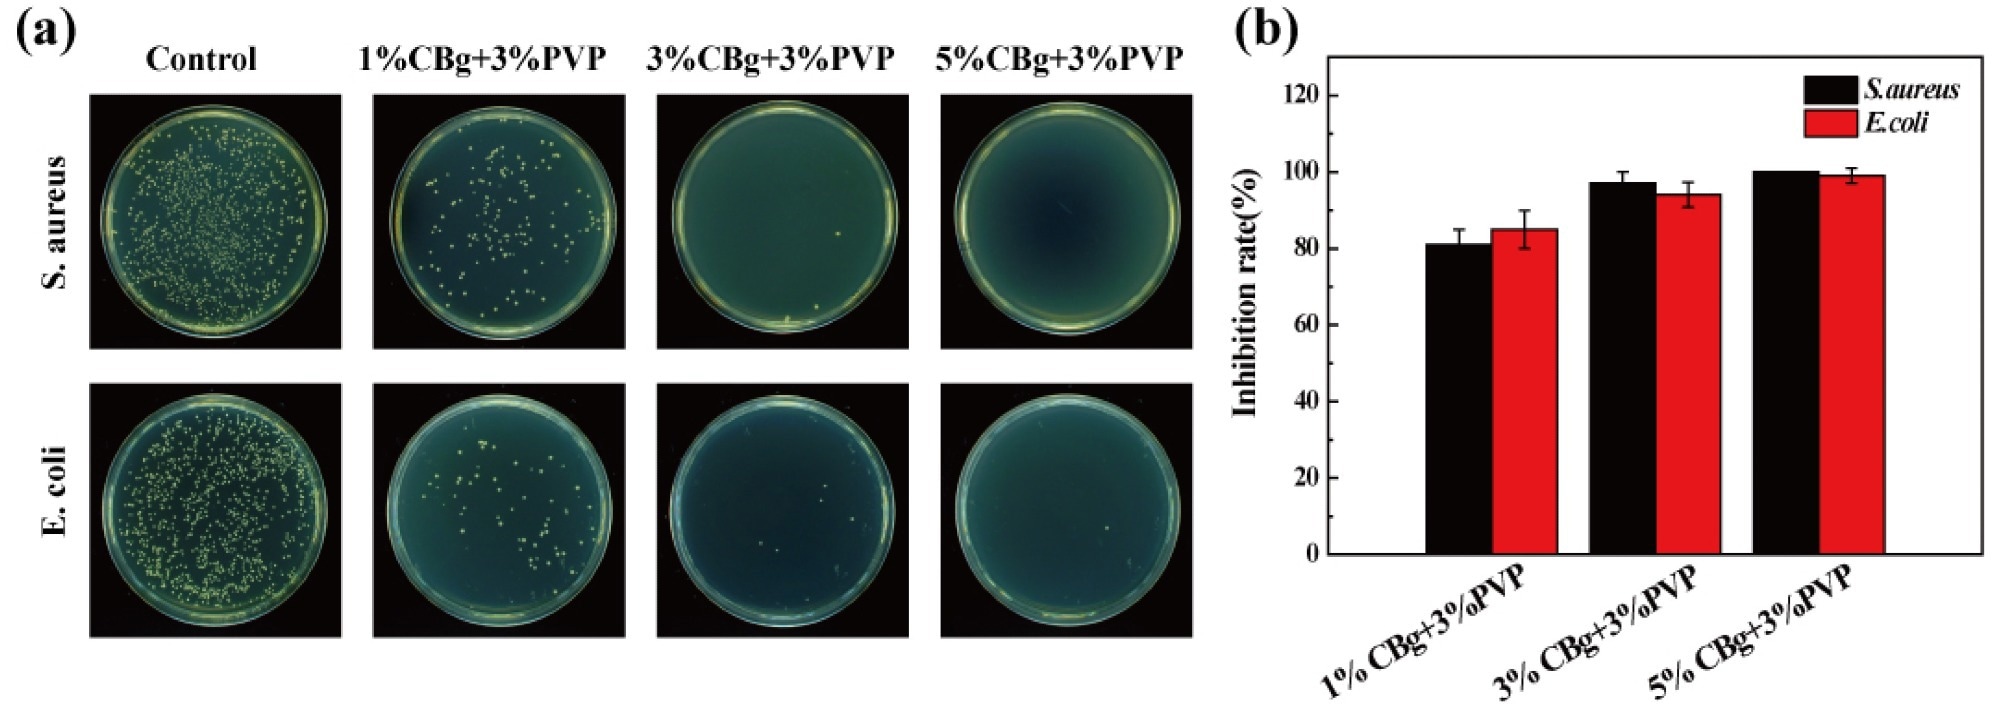 (a) Antibacterial effect of different CBg/PVP films on S. aureus and E. coli. (b) Inhibition rate of different CBg/PVP films.